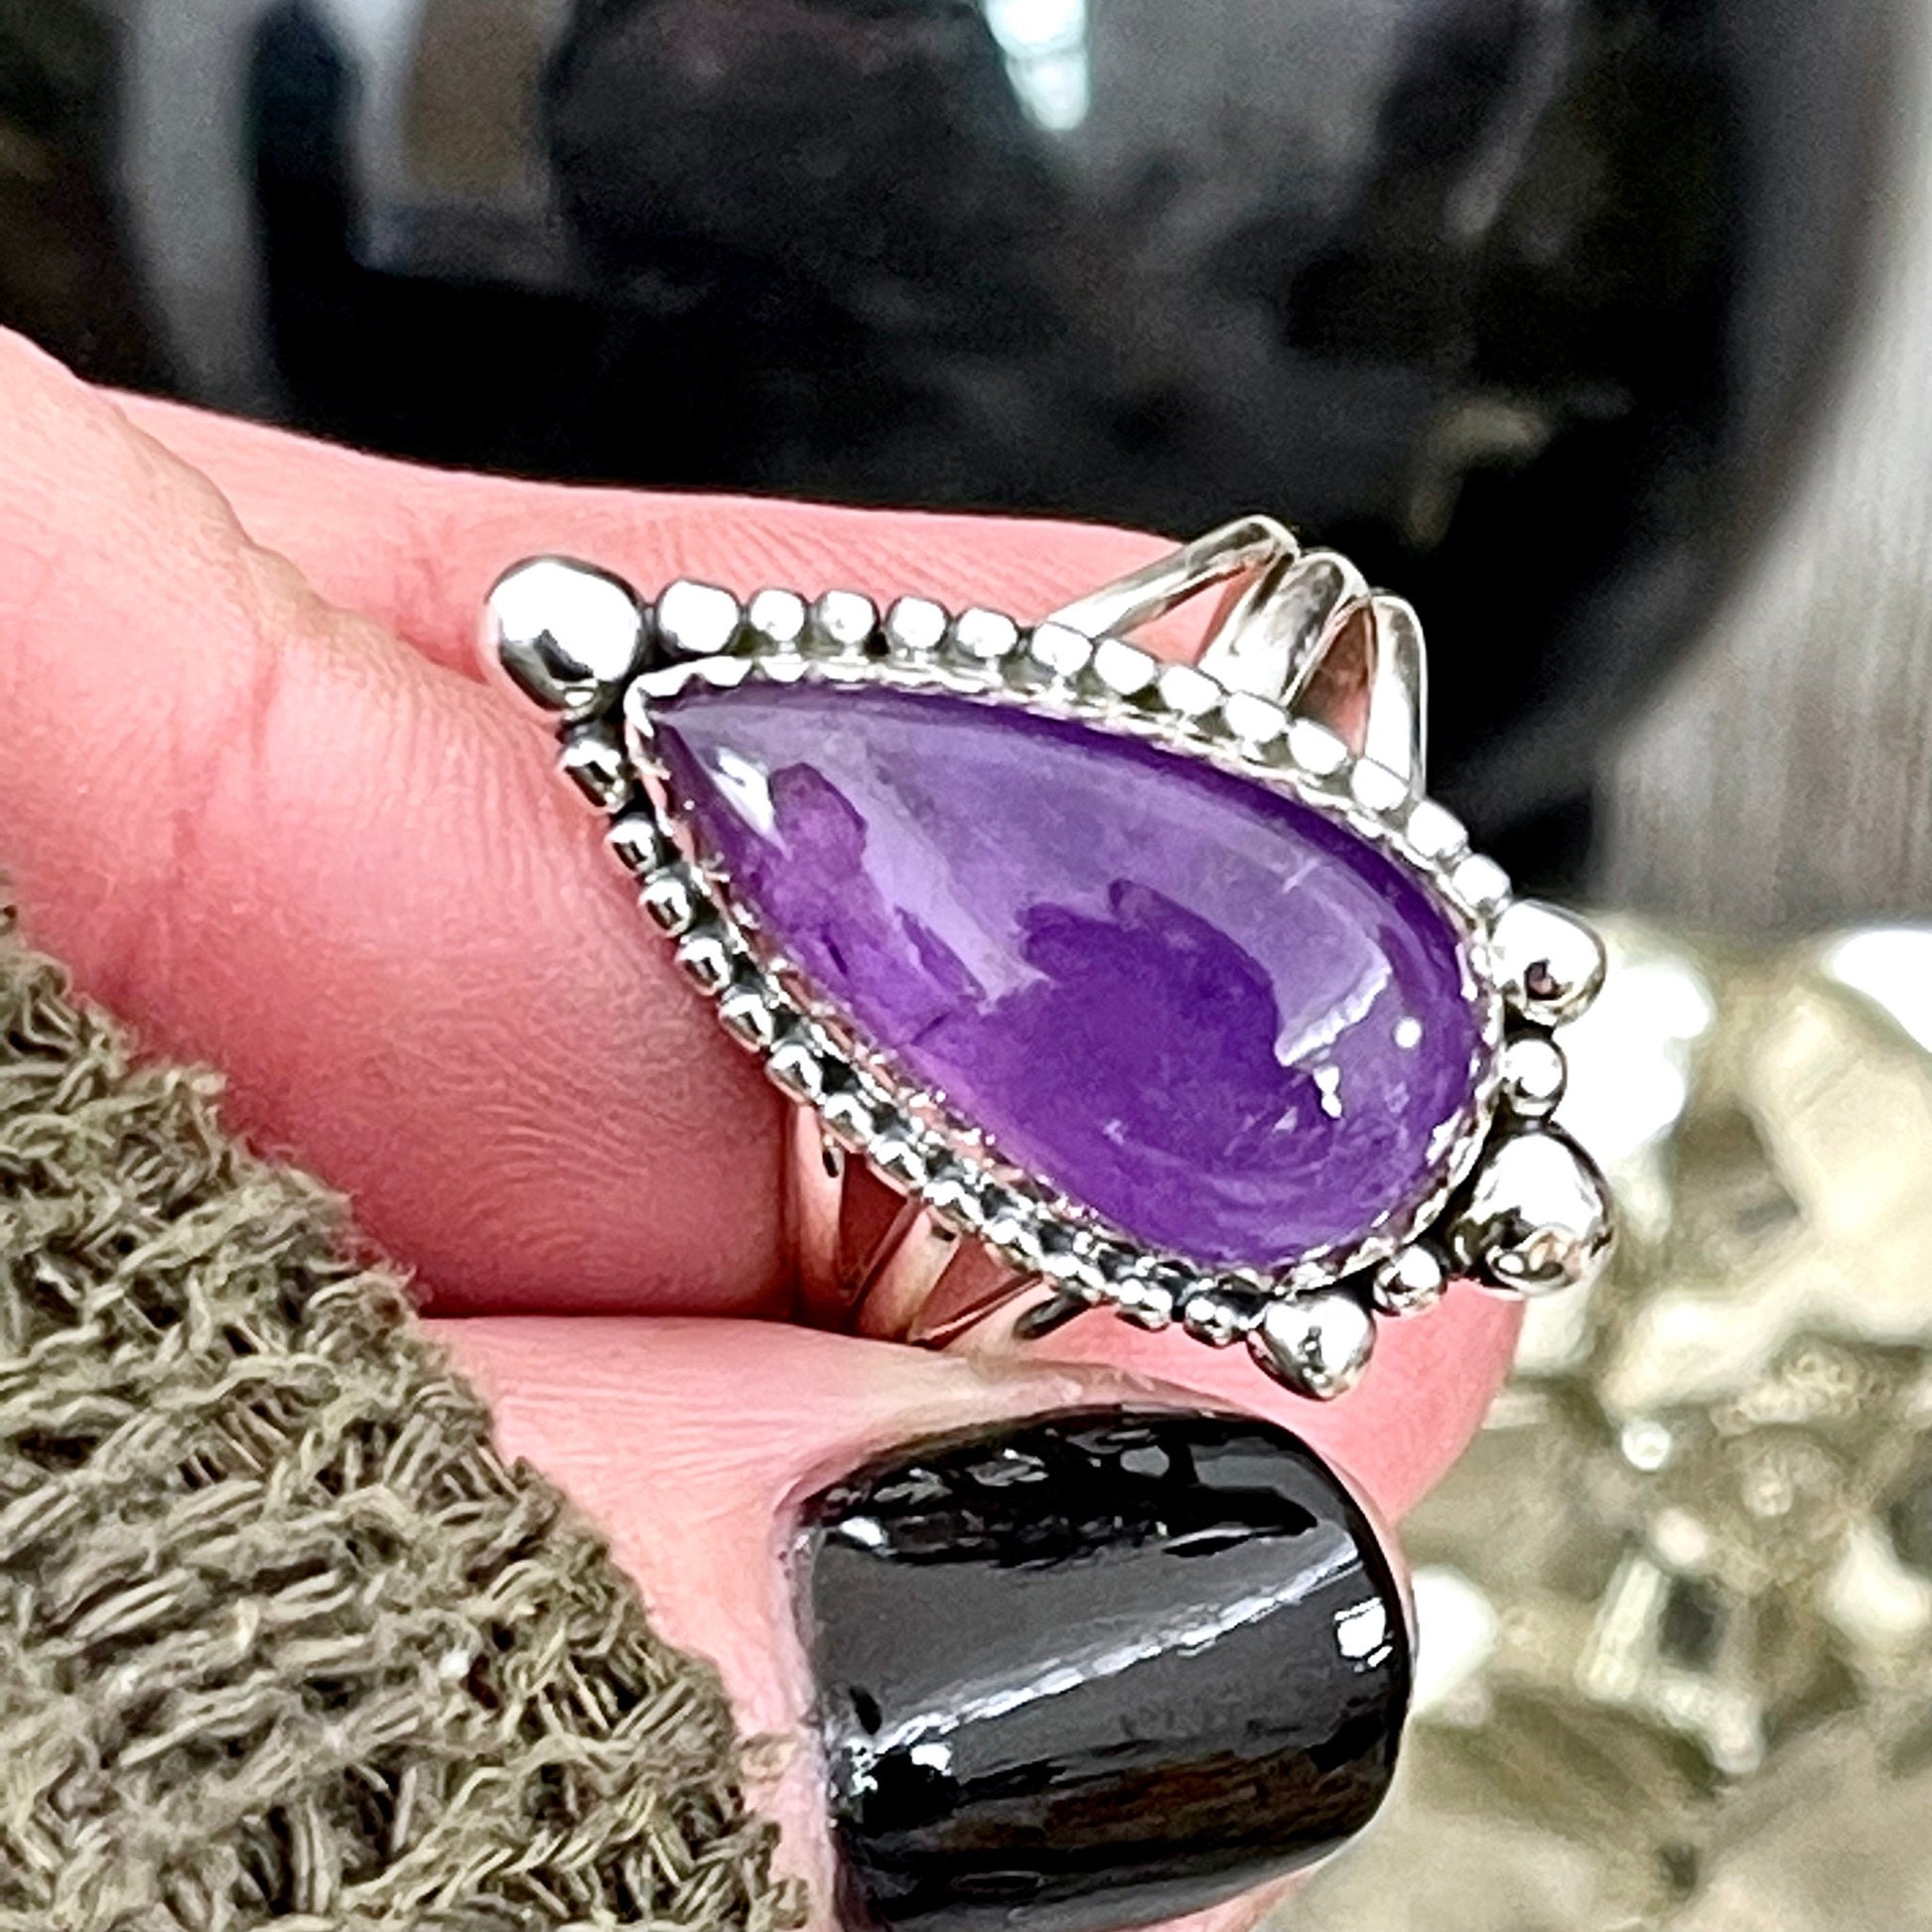 Big Crystal Ring, Bohemian Jewelry, Bohemian Ring, boho jewelry, boho ring, crystal ring, Etsy ID: 1389364626, FOXLARK- RINGS, Gothic Jewelry, gypsy ring, Jewelry, Purple Amethyst, Purple Stone Ring, Rings, Statement Rings, Teardrop Ring, Witch Jewelry, W